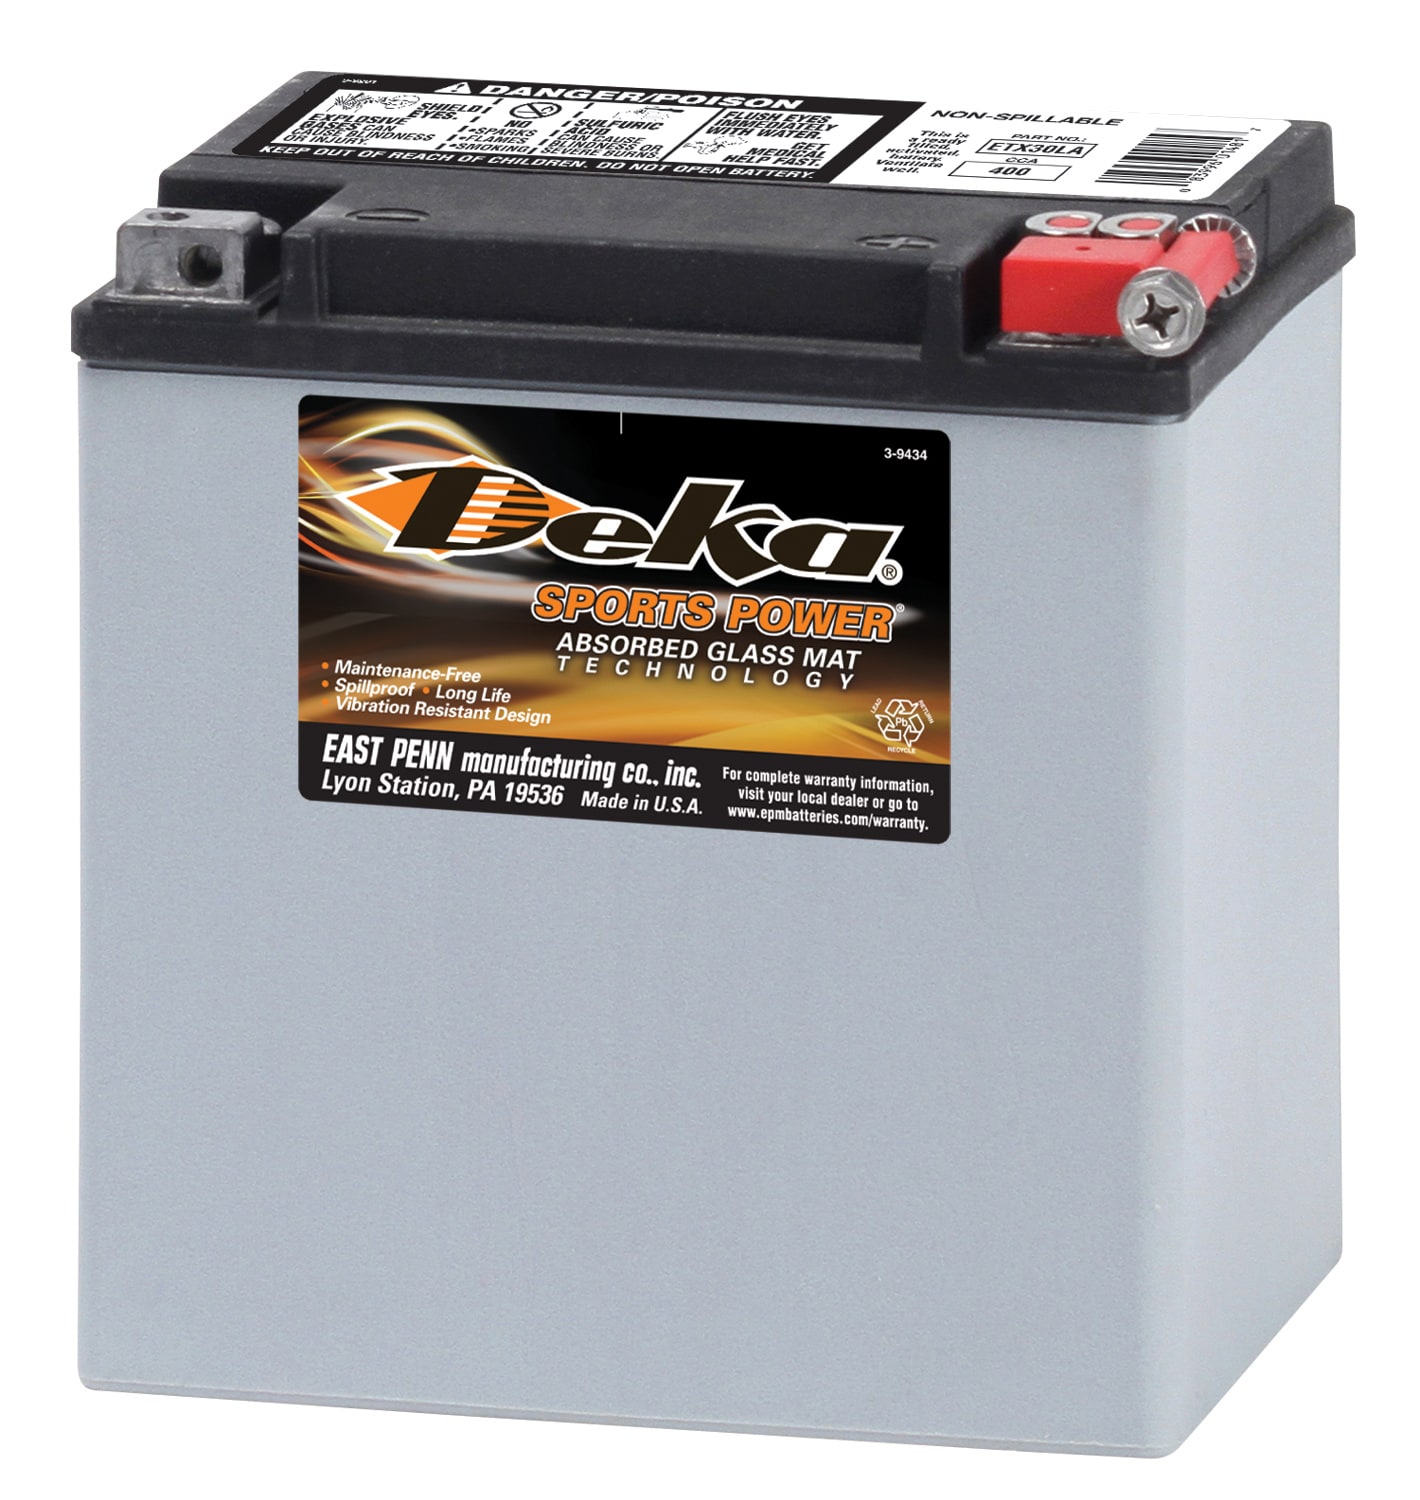 Deka 12 Volt Motorcycle Battery In The Power Equipment Batteries Department At Lowes Com